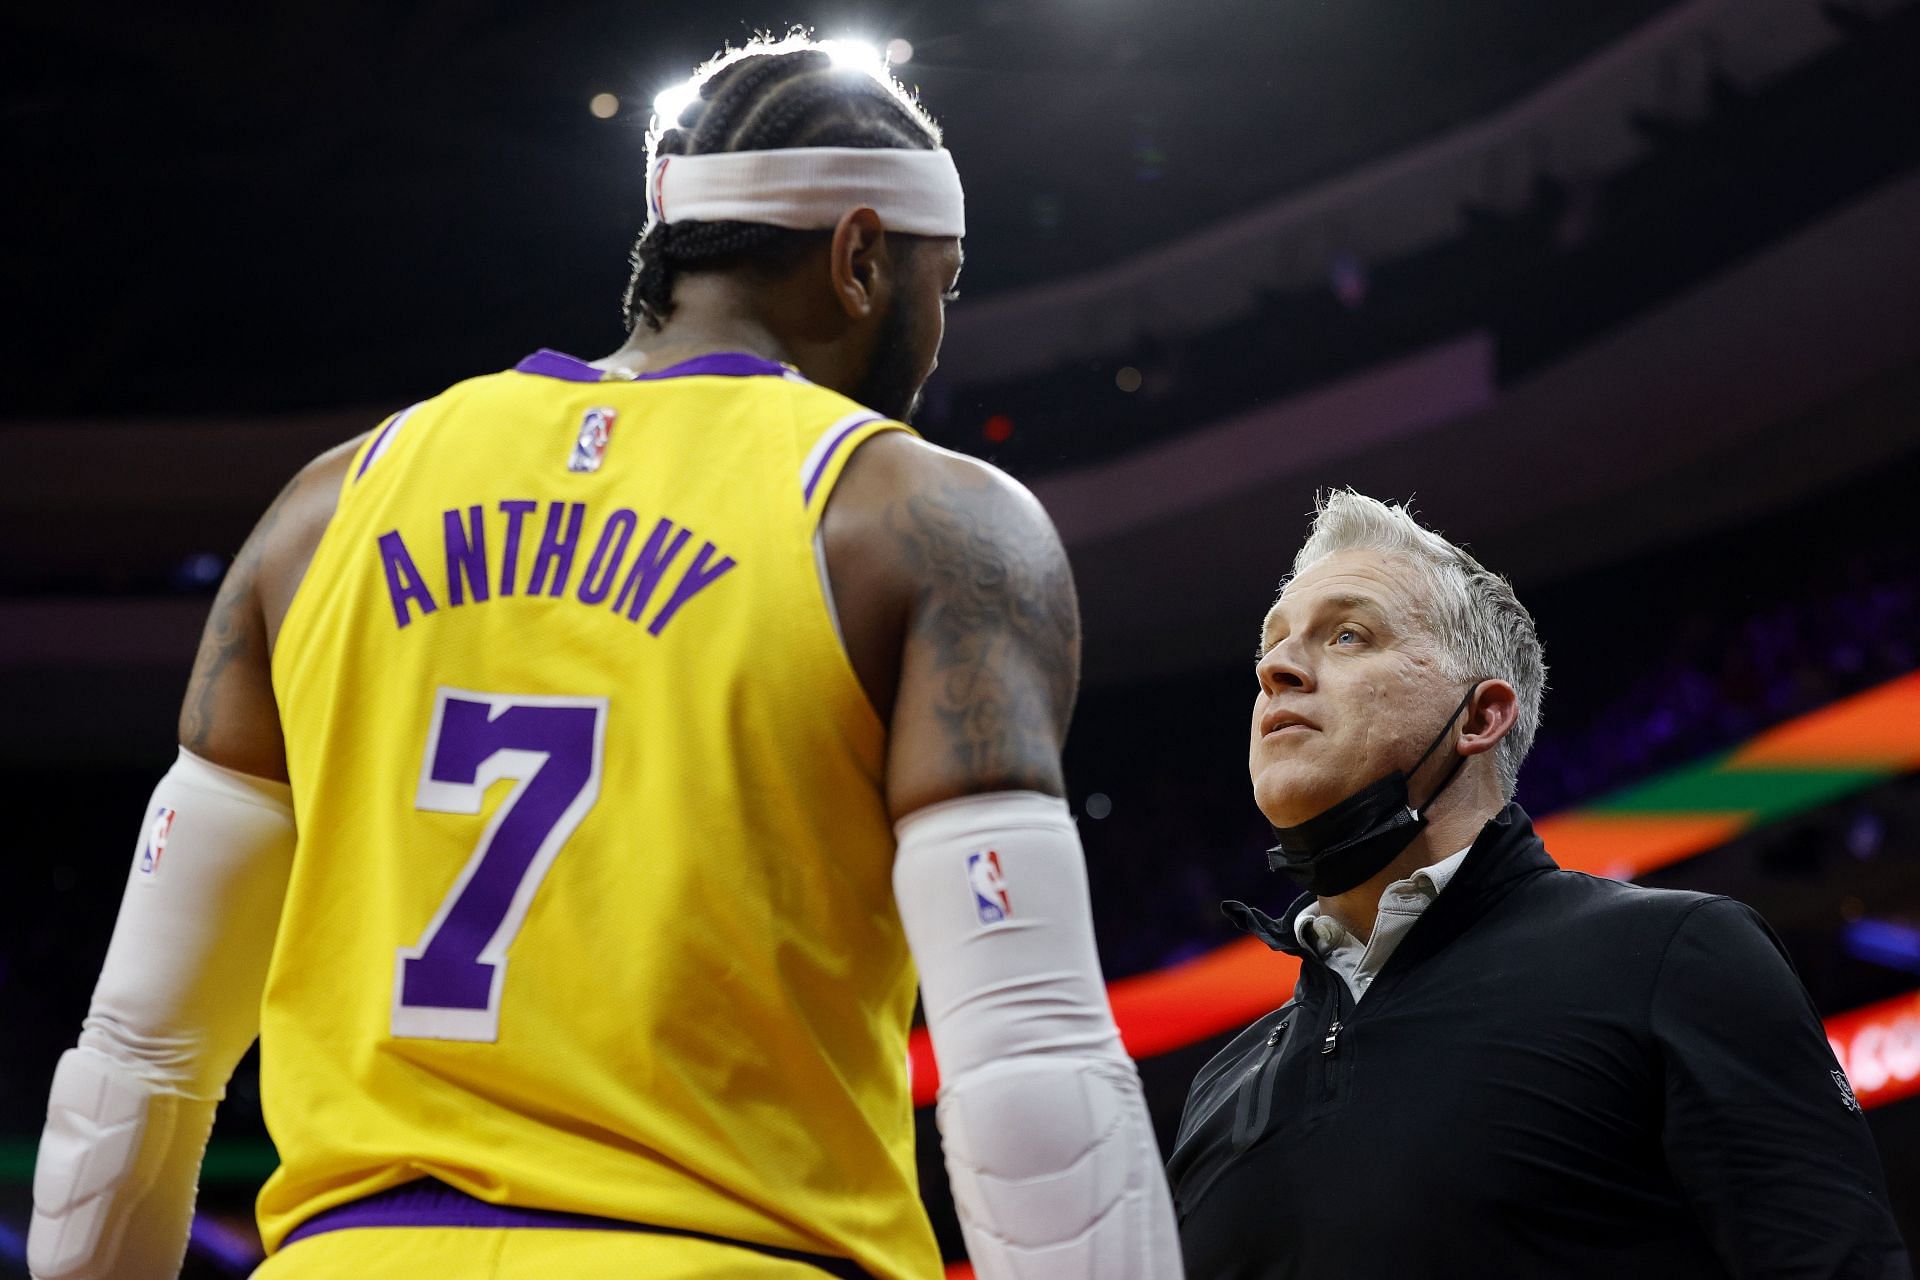 Carmelo Anthony of the LA Lakers confronts a heckler (not pictured) during the fourth quarter of a game against the Philadelphia 76ers at Wells Fargo Center on Thursday in Philadelphia, Pennsylvania. The heckler was ejected from the arena.